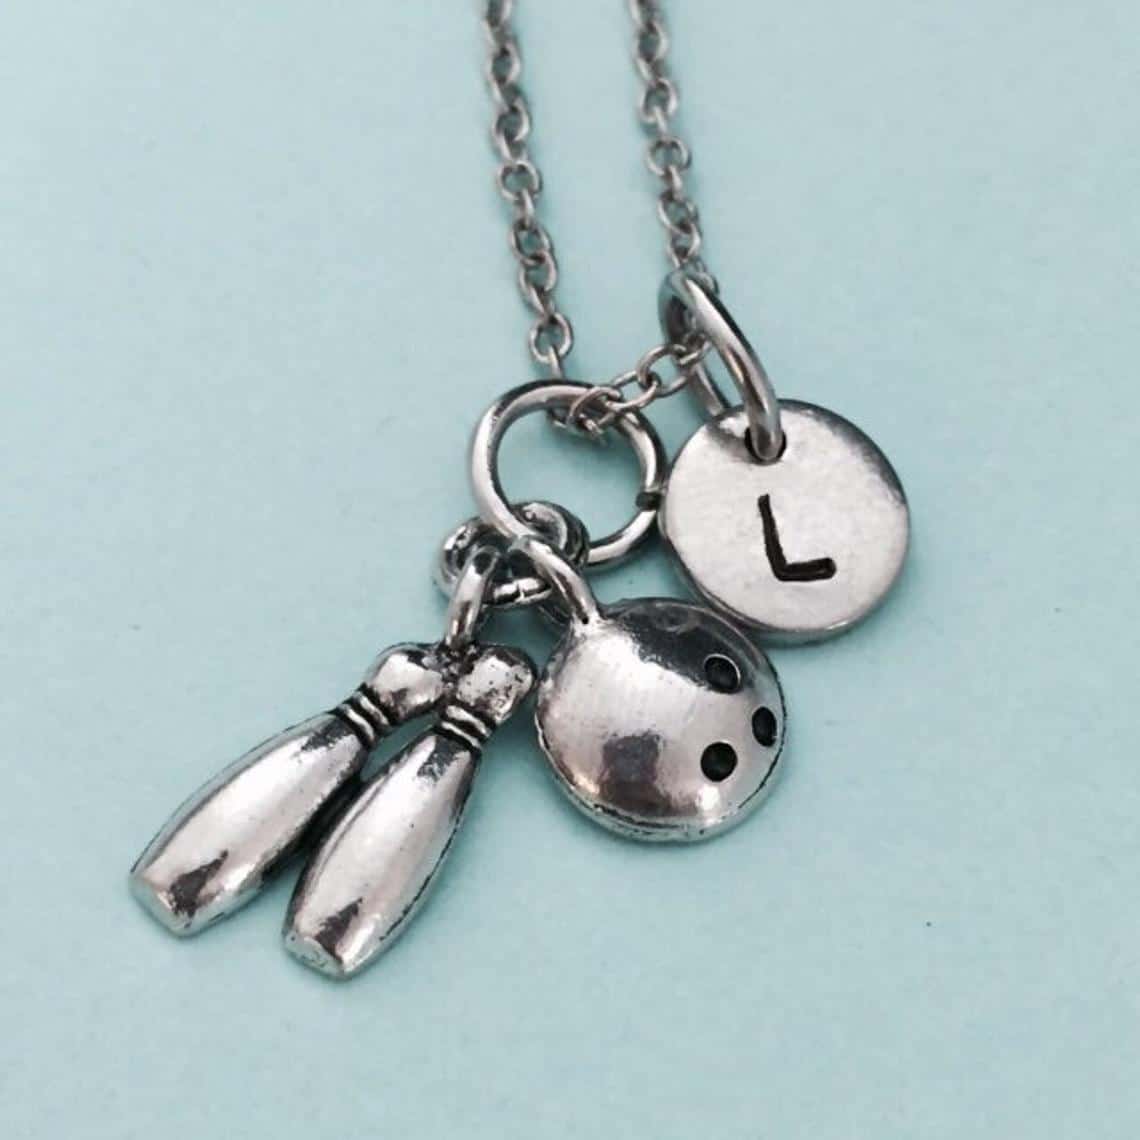 A Charming Bowling Necklace